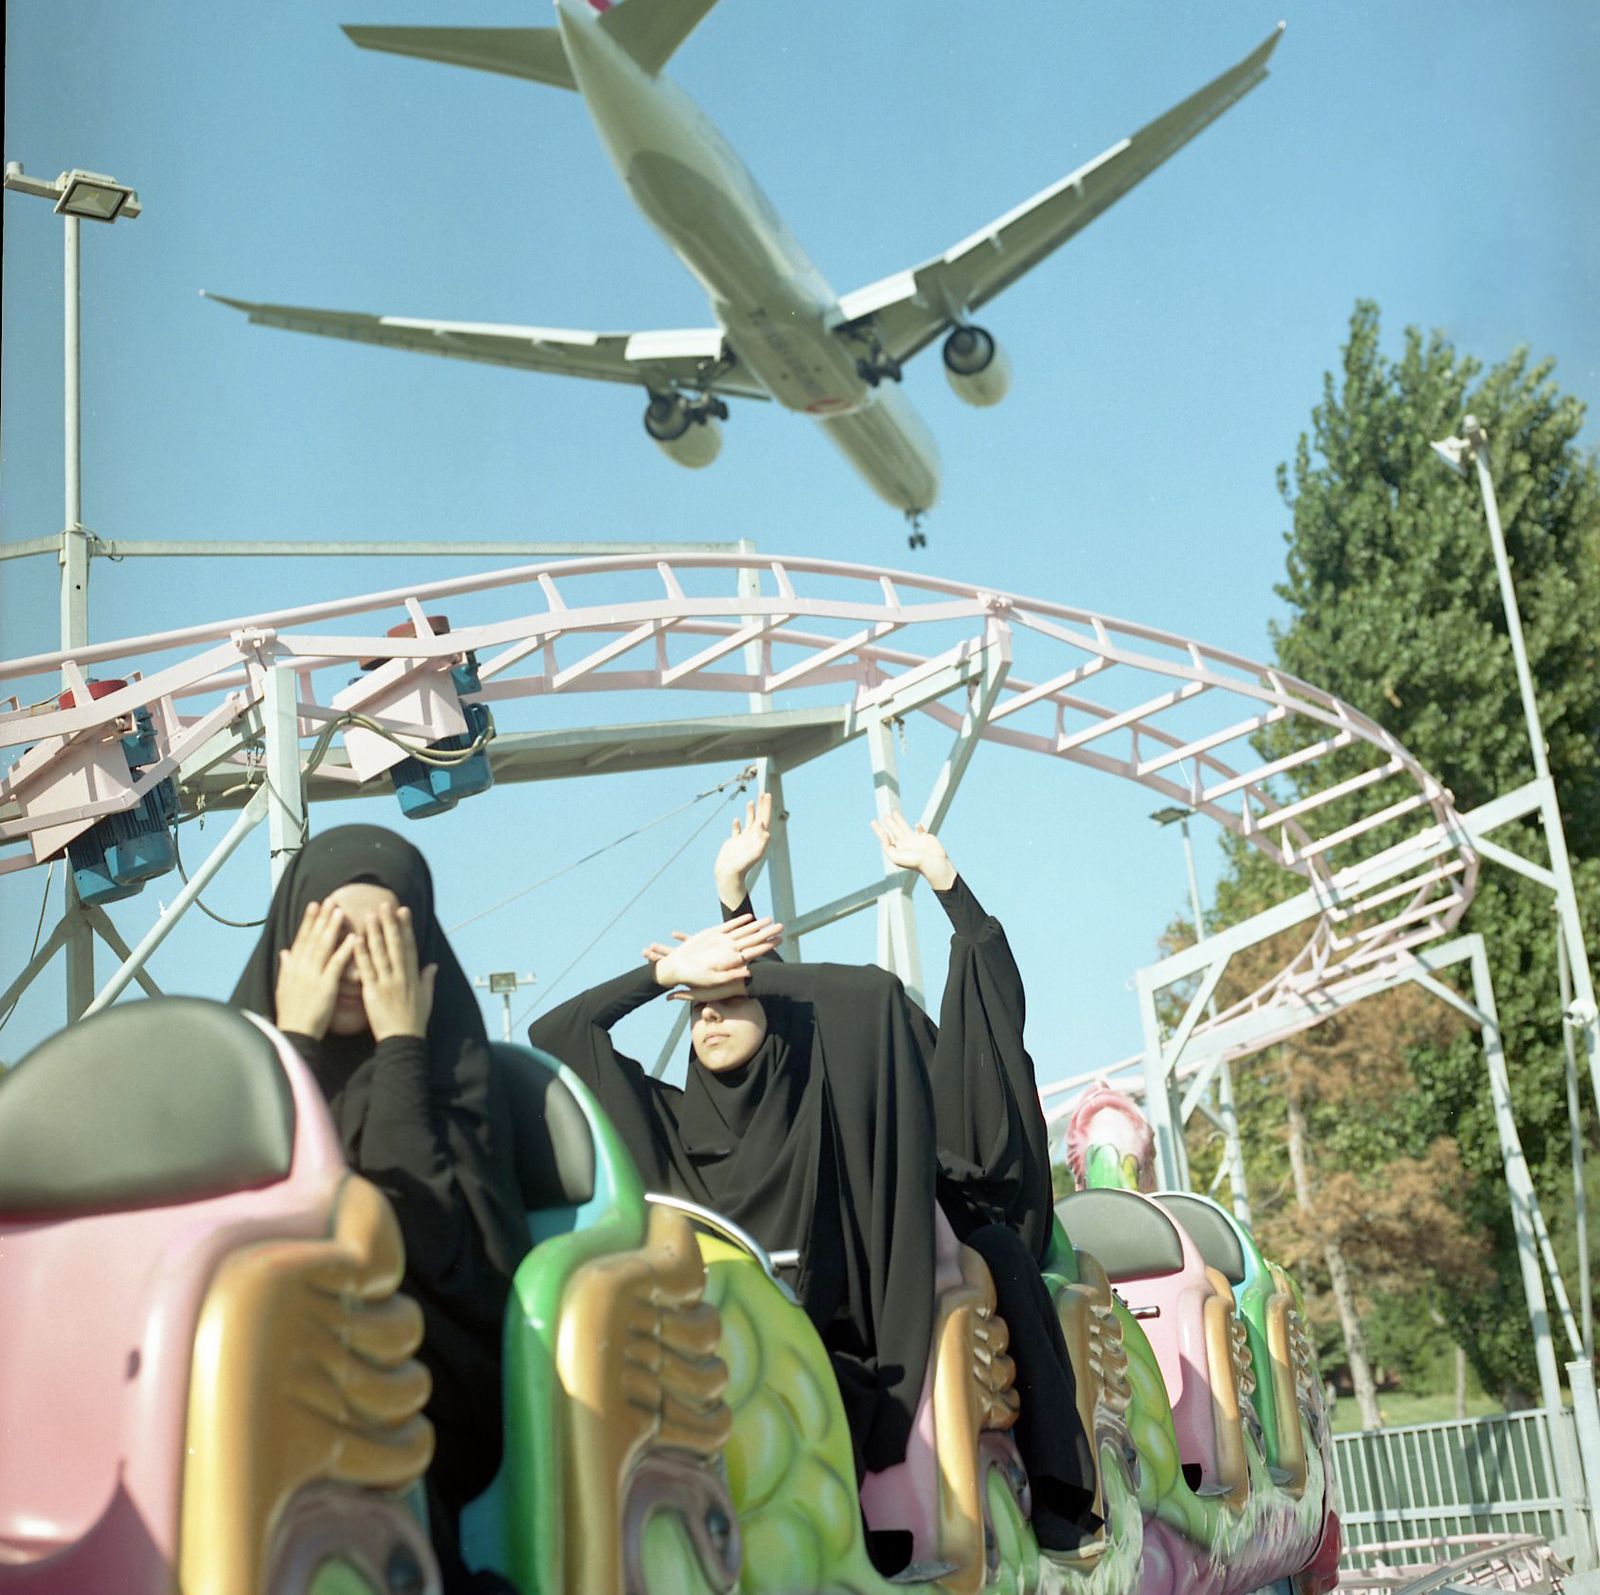 © Sabiha Çimen - Funfair. Turkey-Istanbul On the weekend girls are on the train at the fun fair and low-level plane passing by.